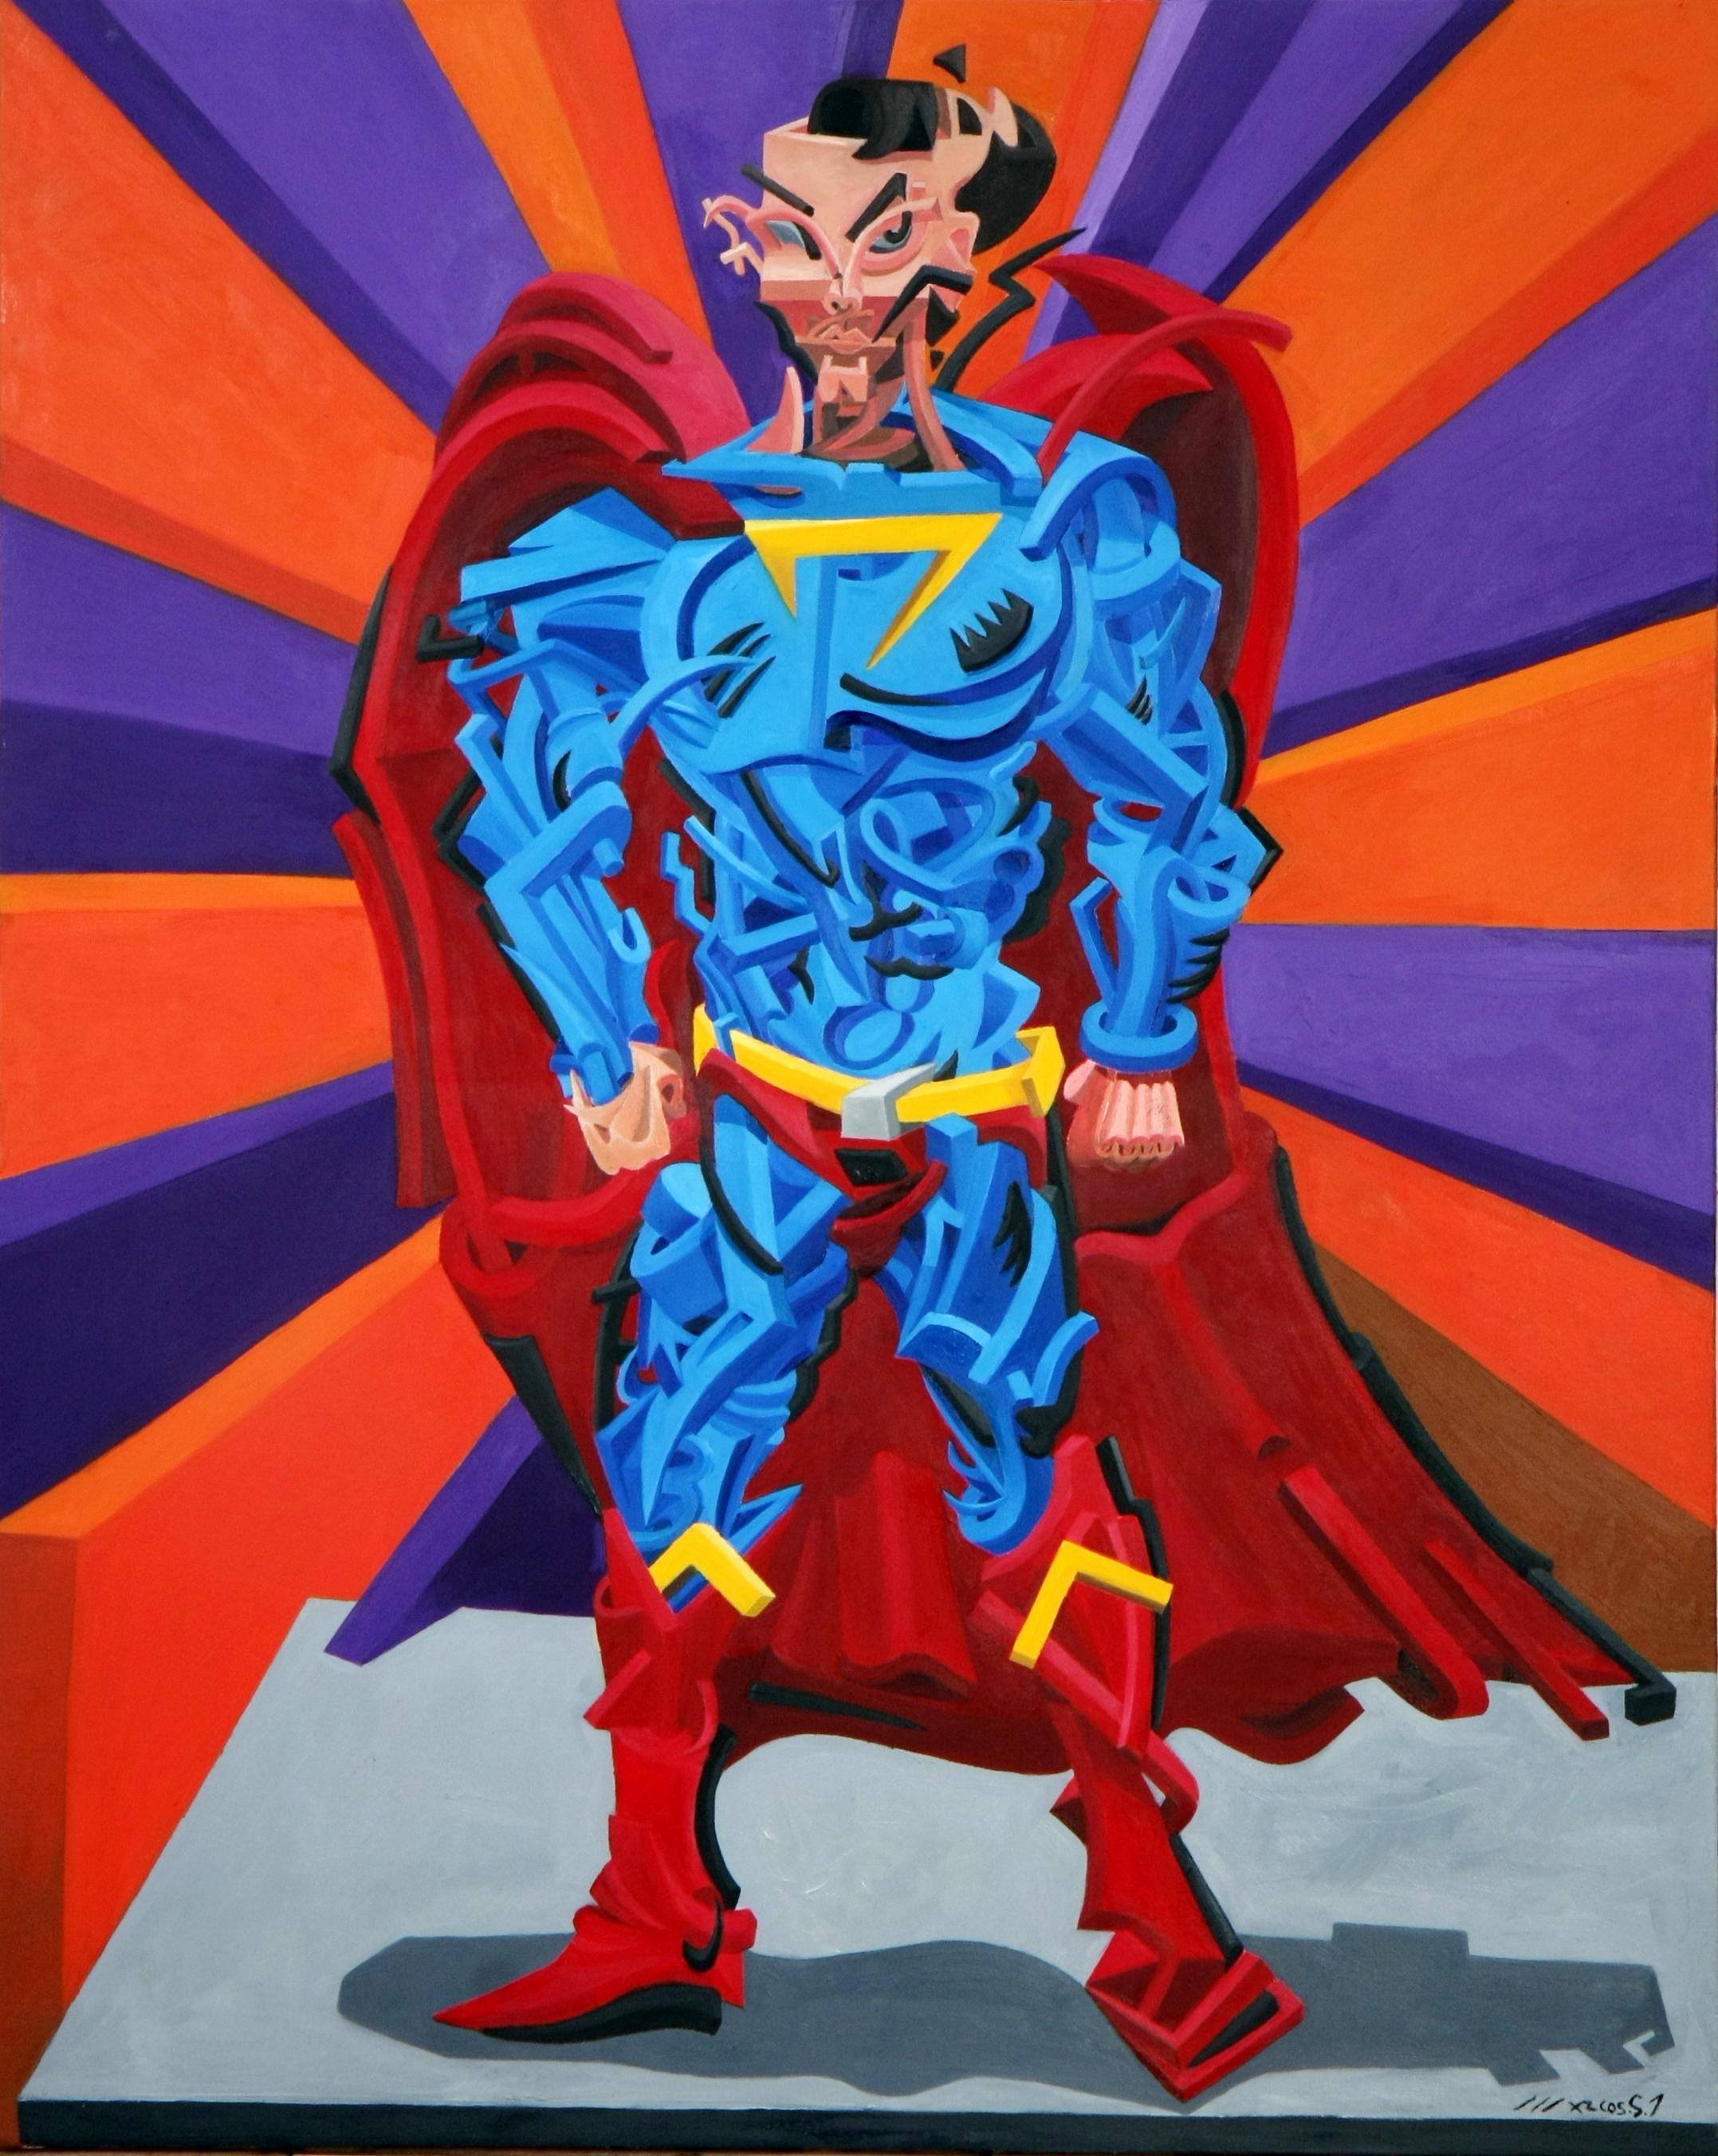 Marcos Inacio Abstract Painting - Superhero, Painting, Oil on Canvas